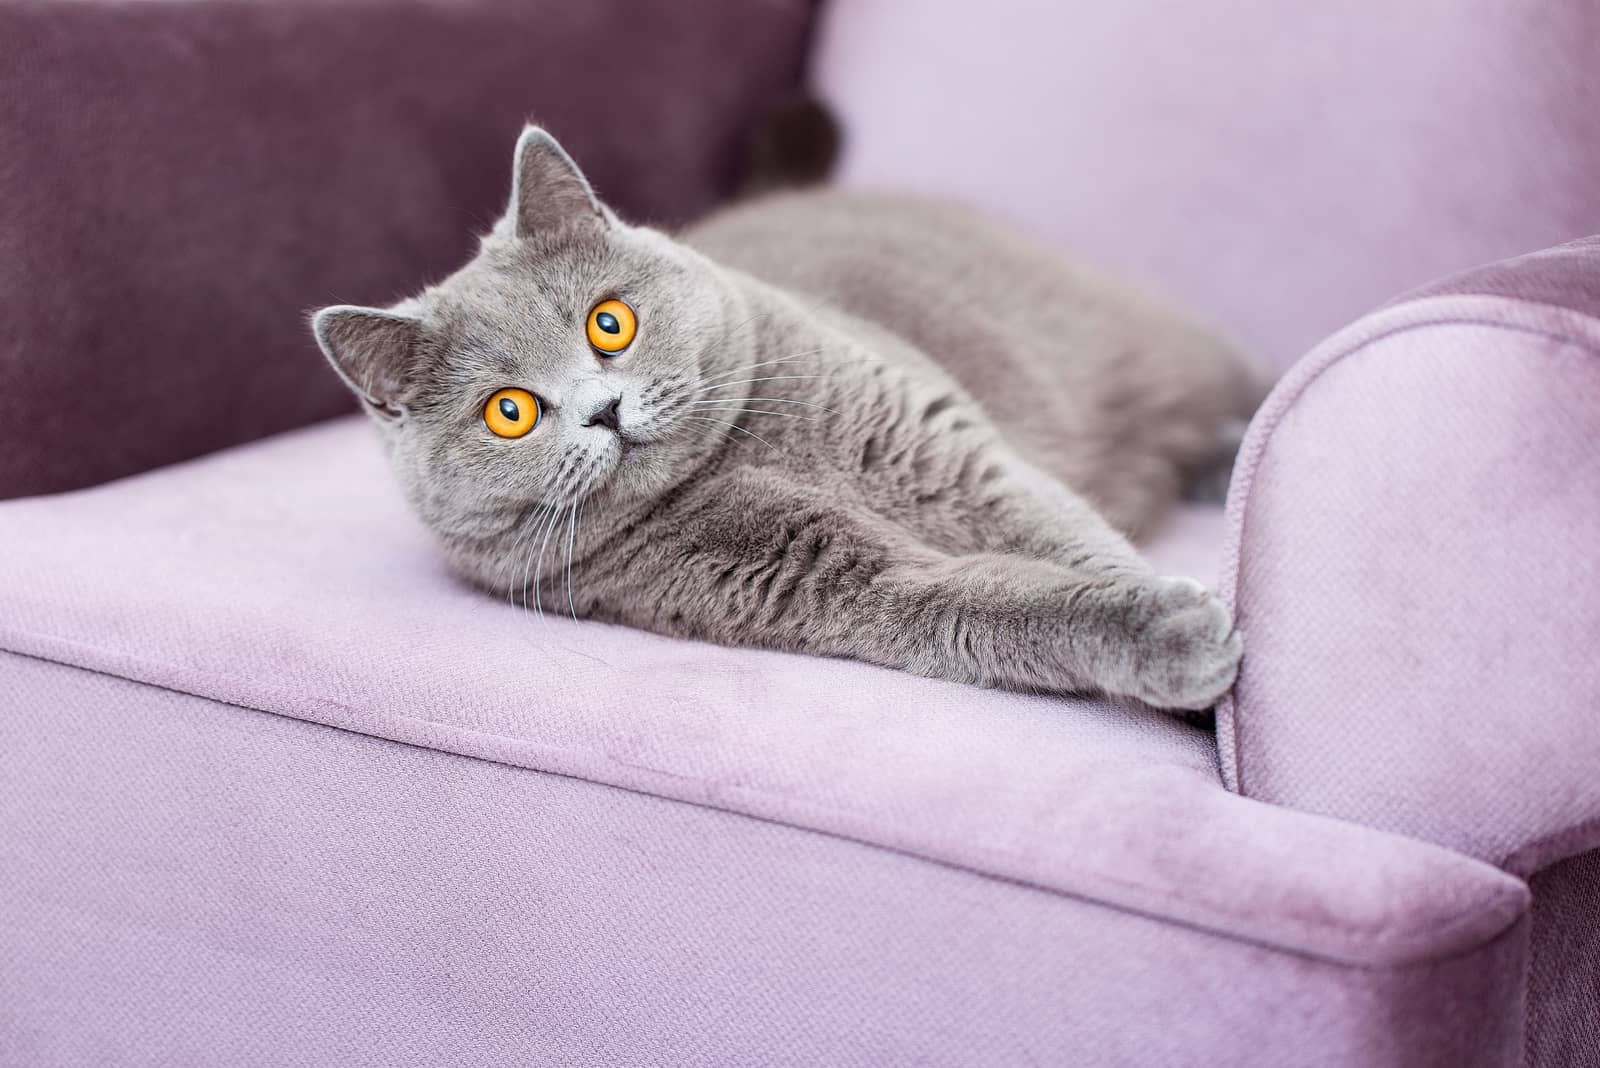 Scottish Shorthair cat lying on the purple couch